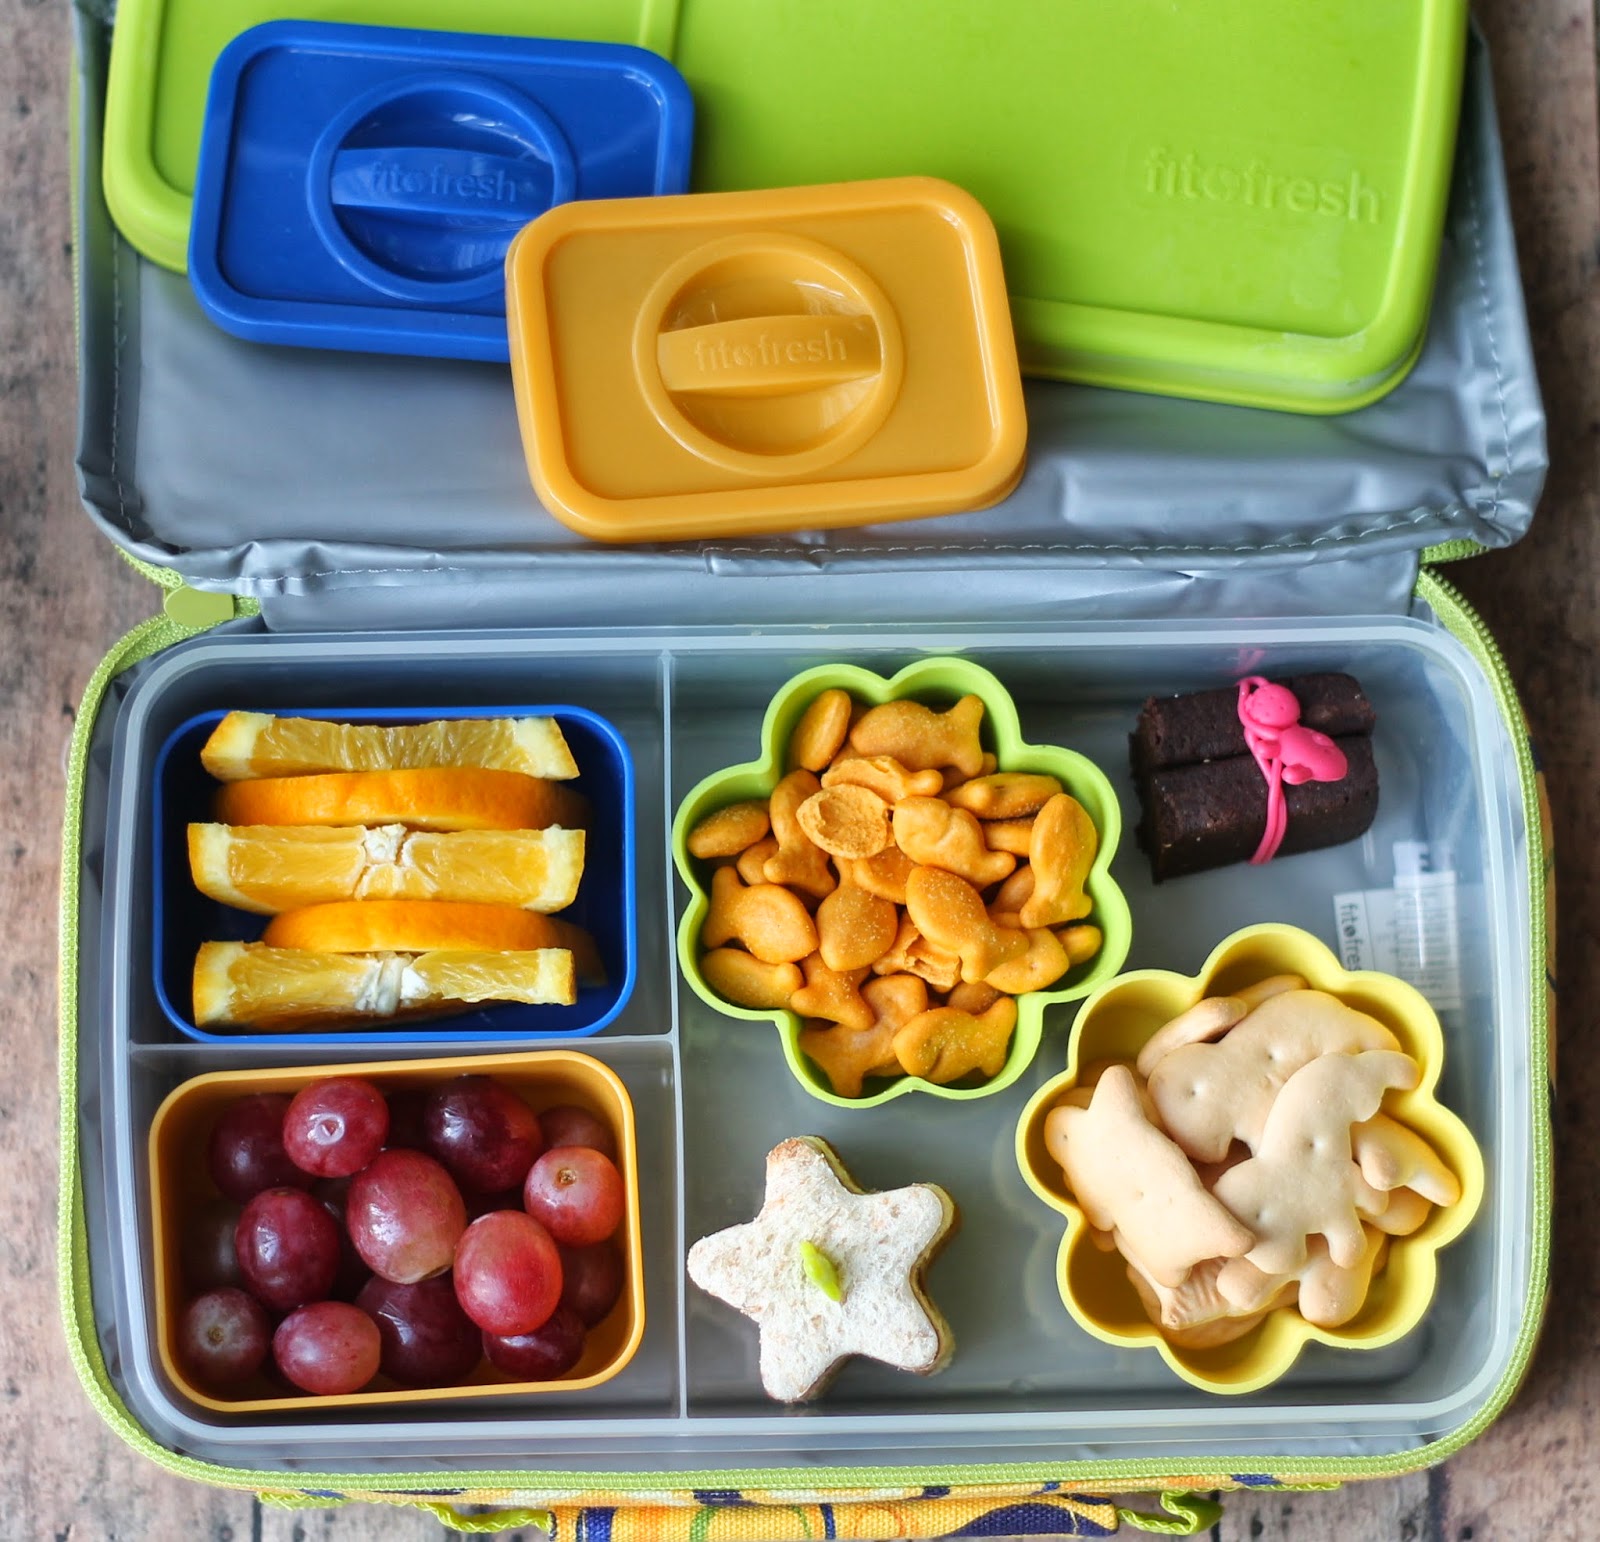 Mamabelly's Lunches With Love: New Lunchbox Fun